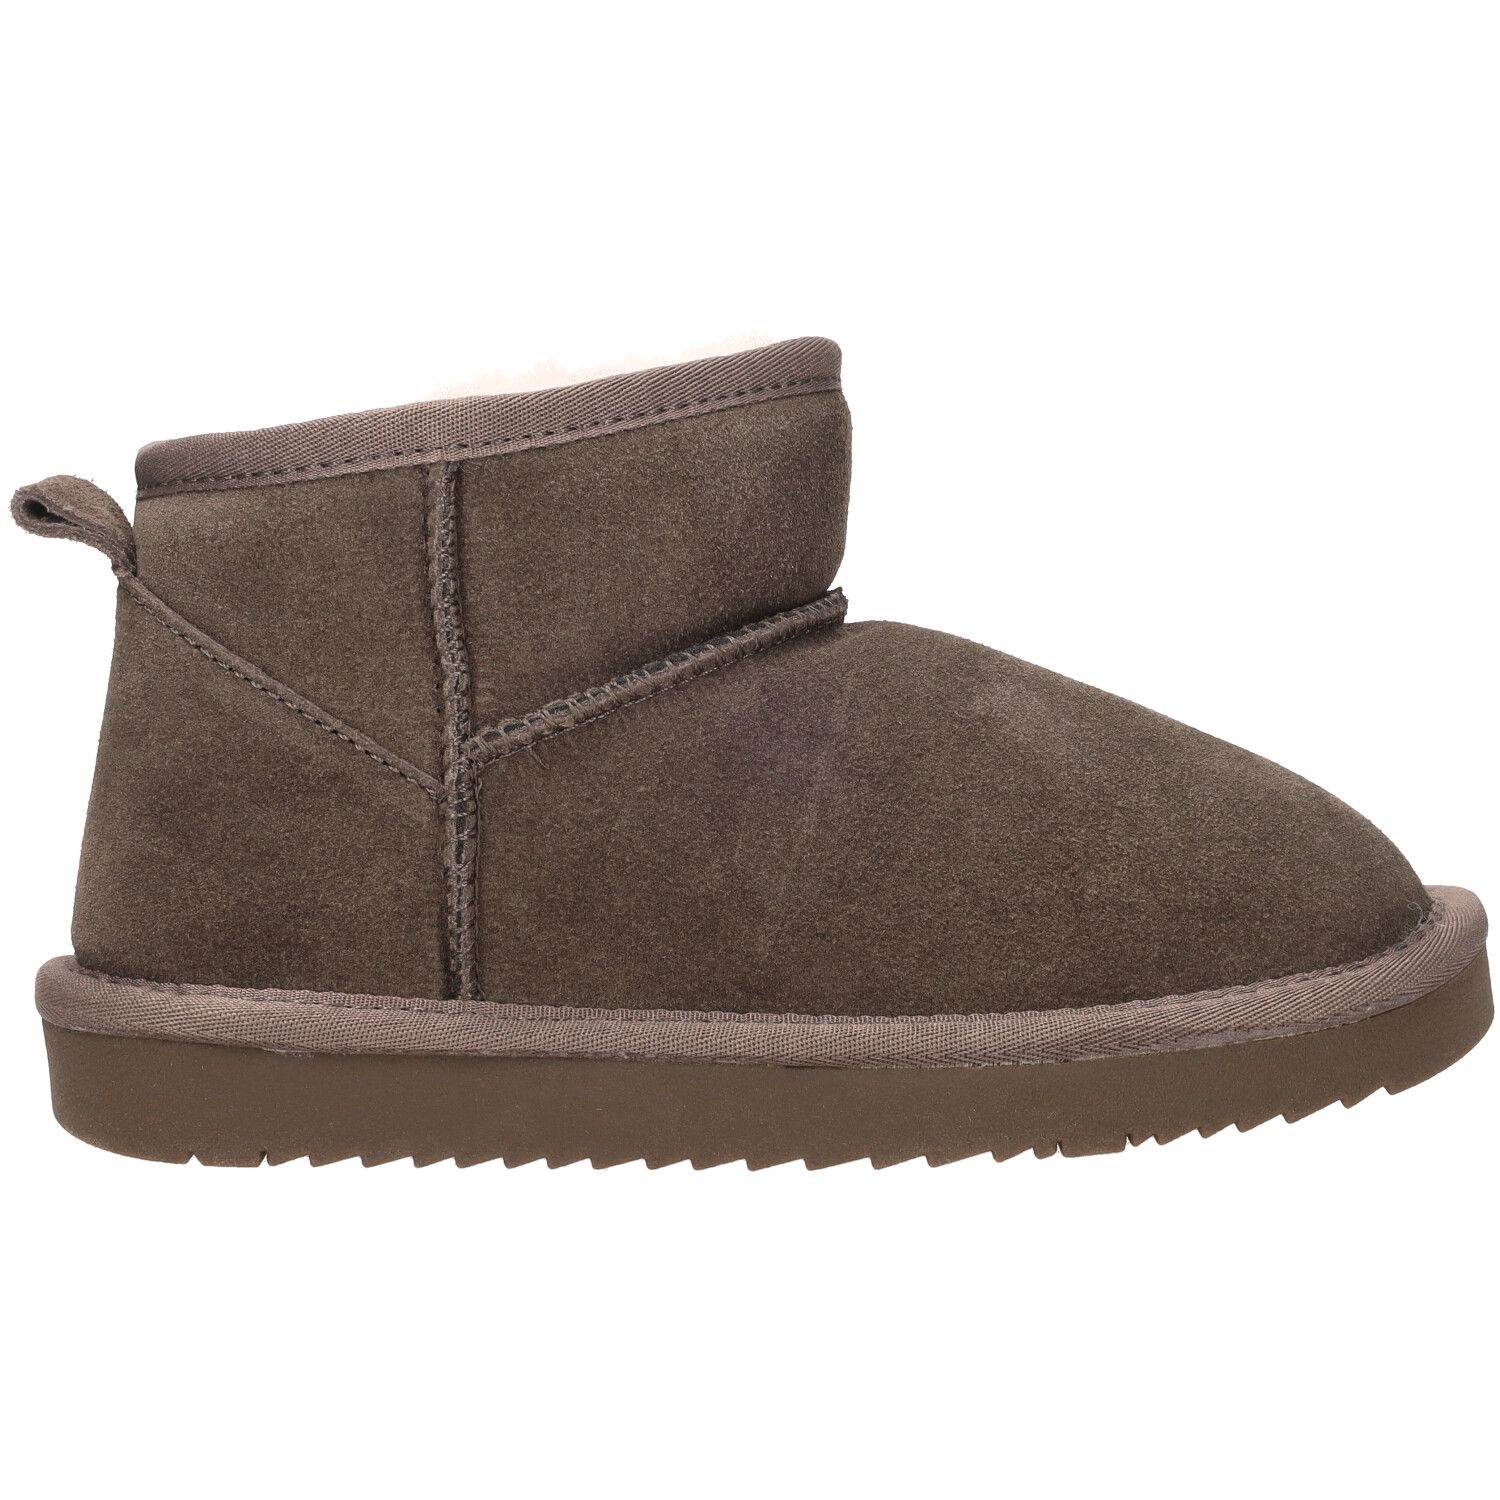 PS Poelman Boot Meisjes Taupe